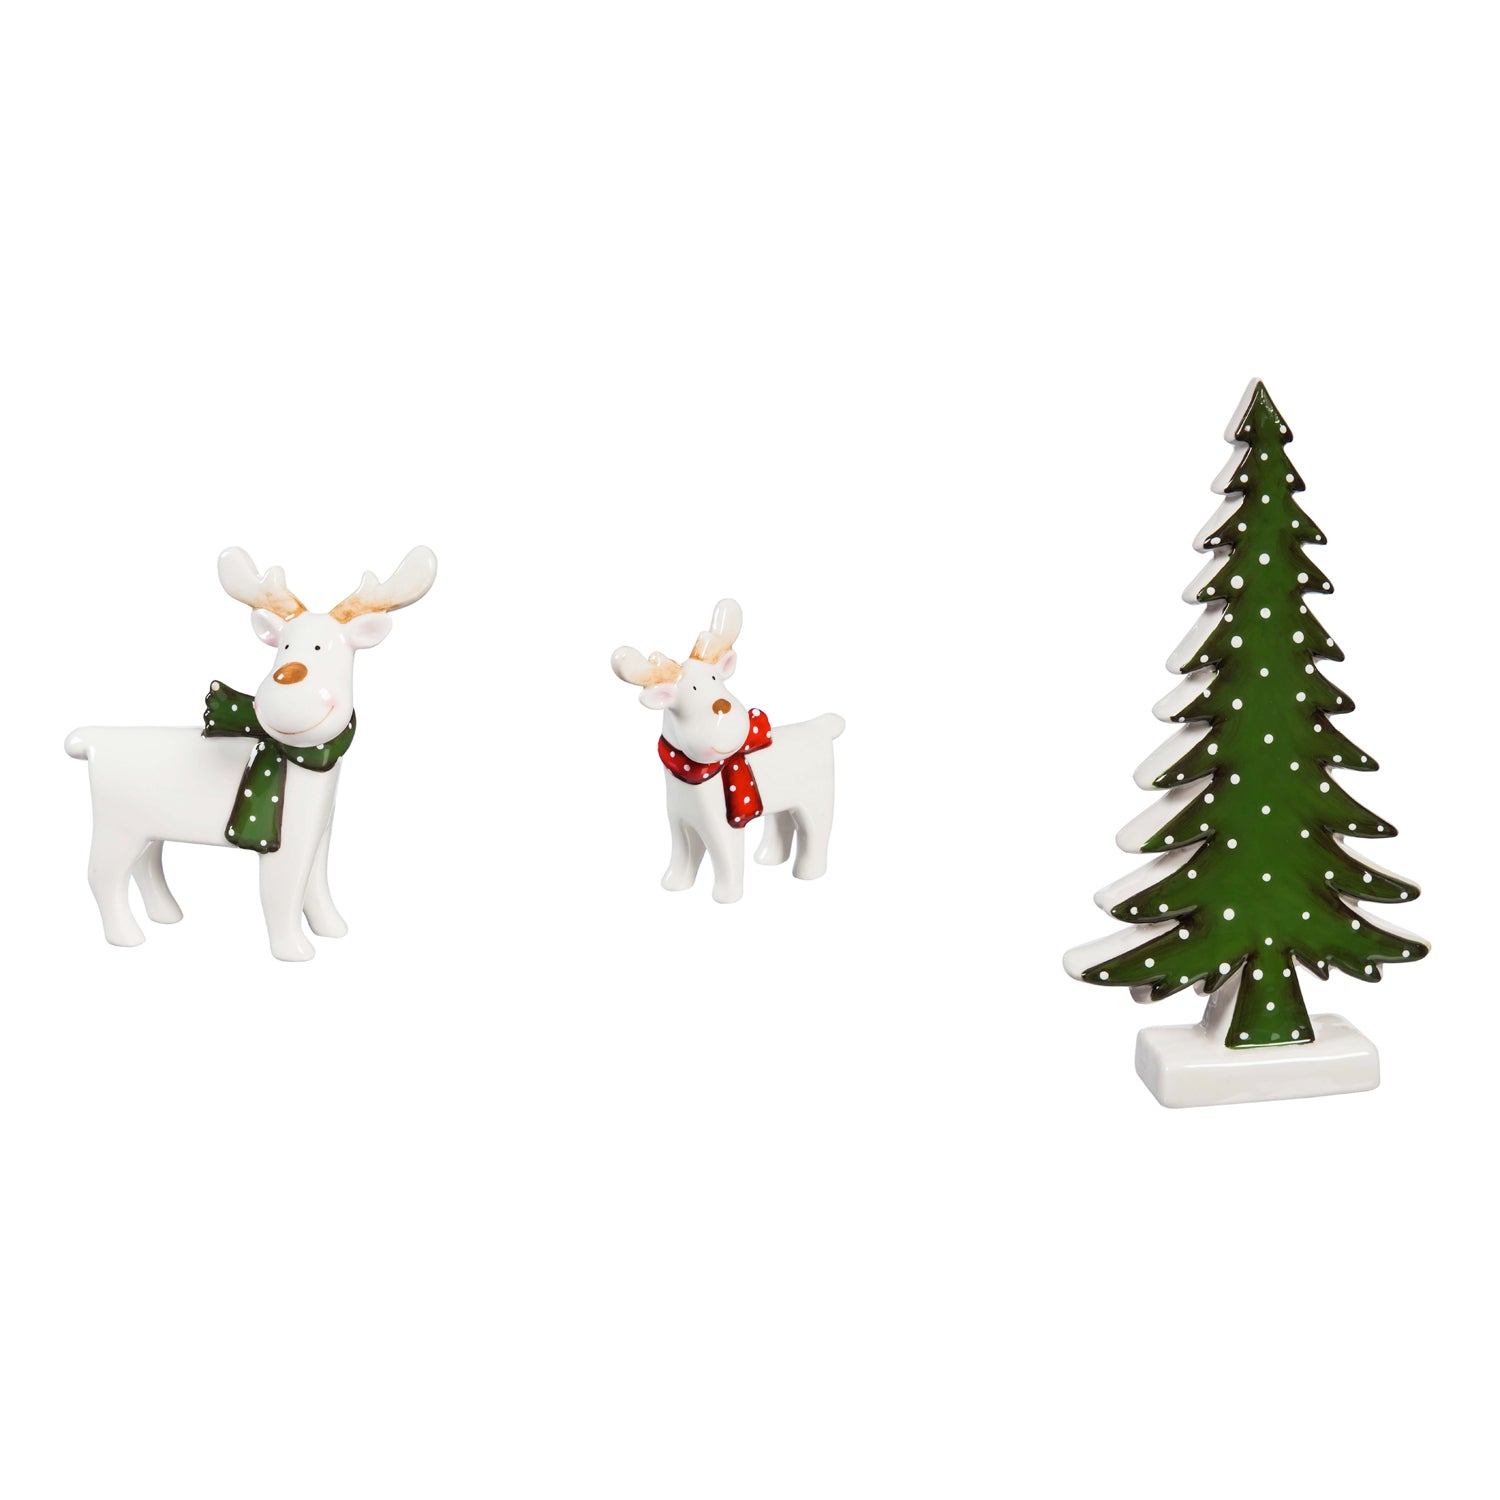 Large Reindeer, Small Reindeer and Christmas Tree set of 3 - Lake Norman Gifts